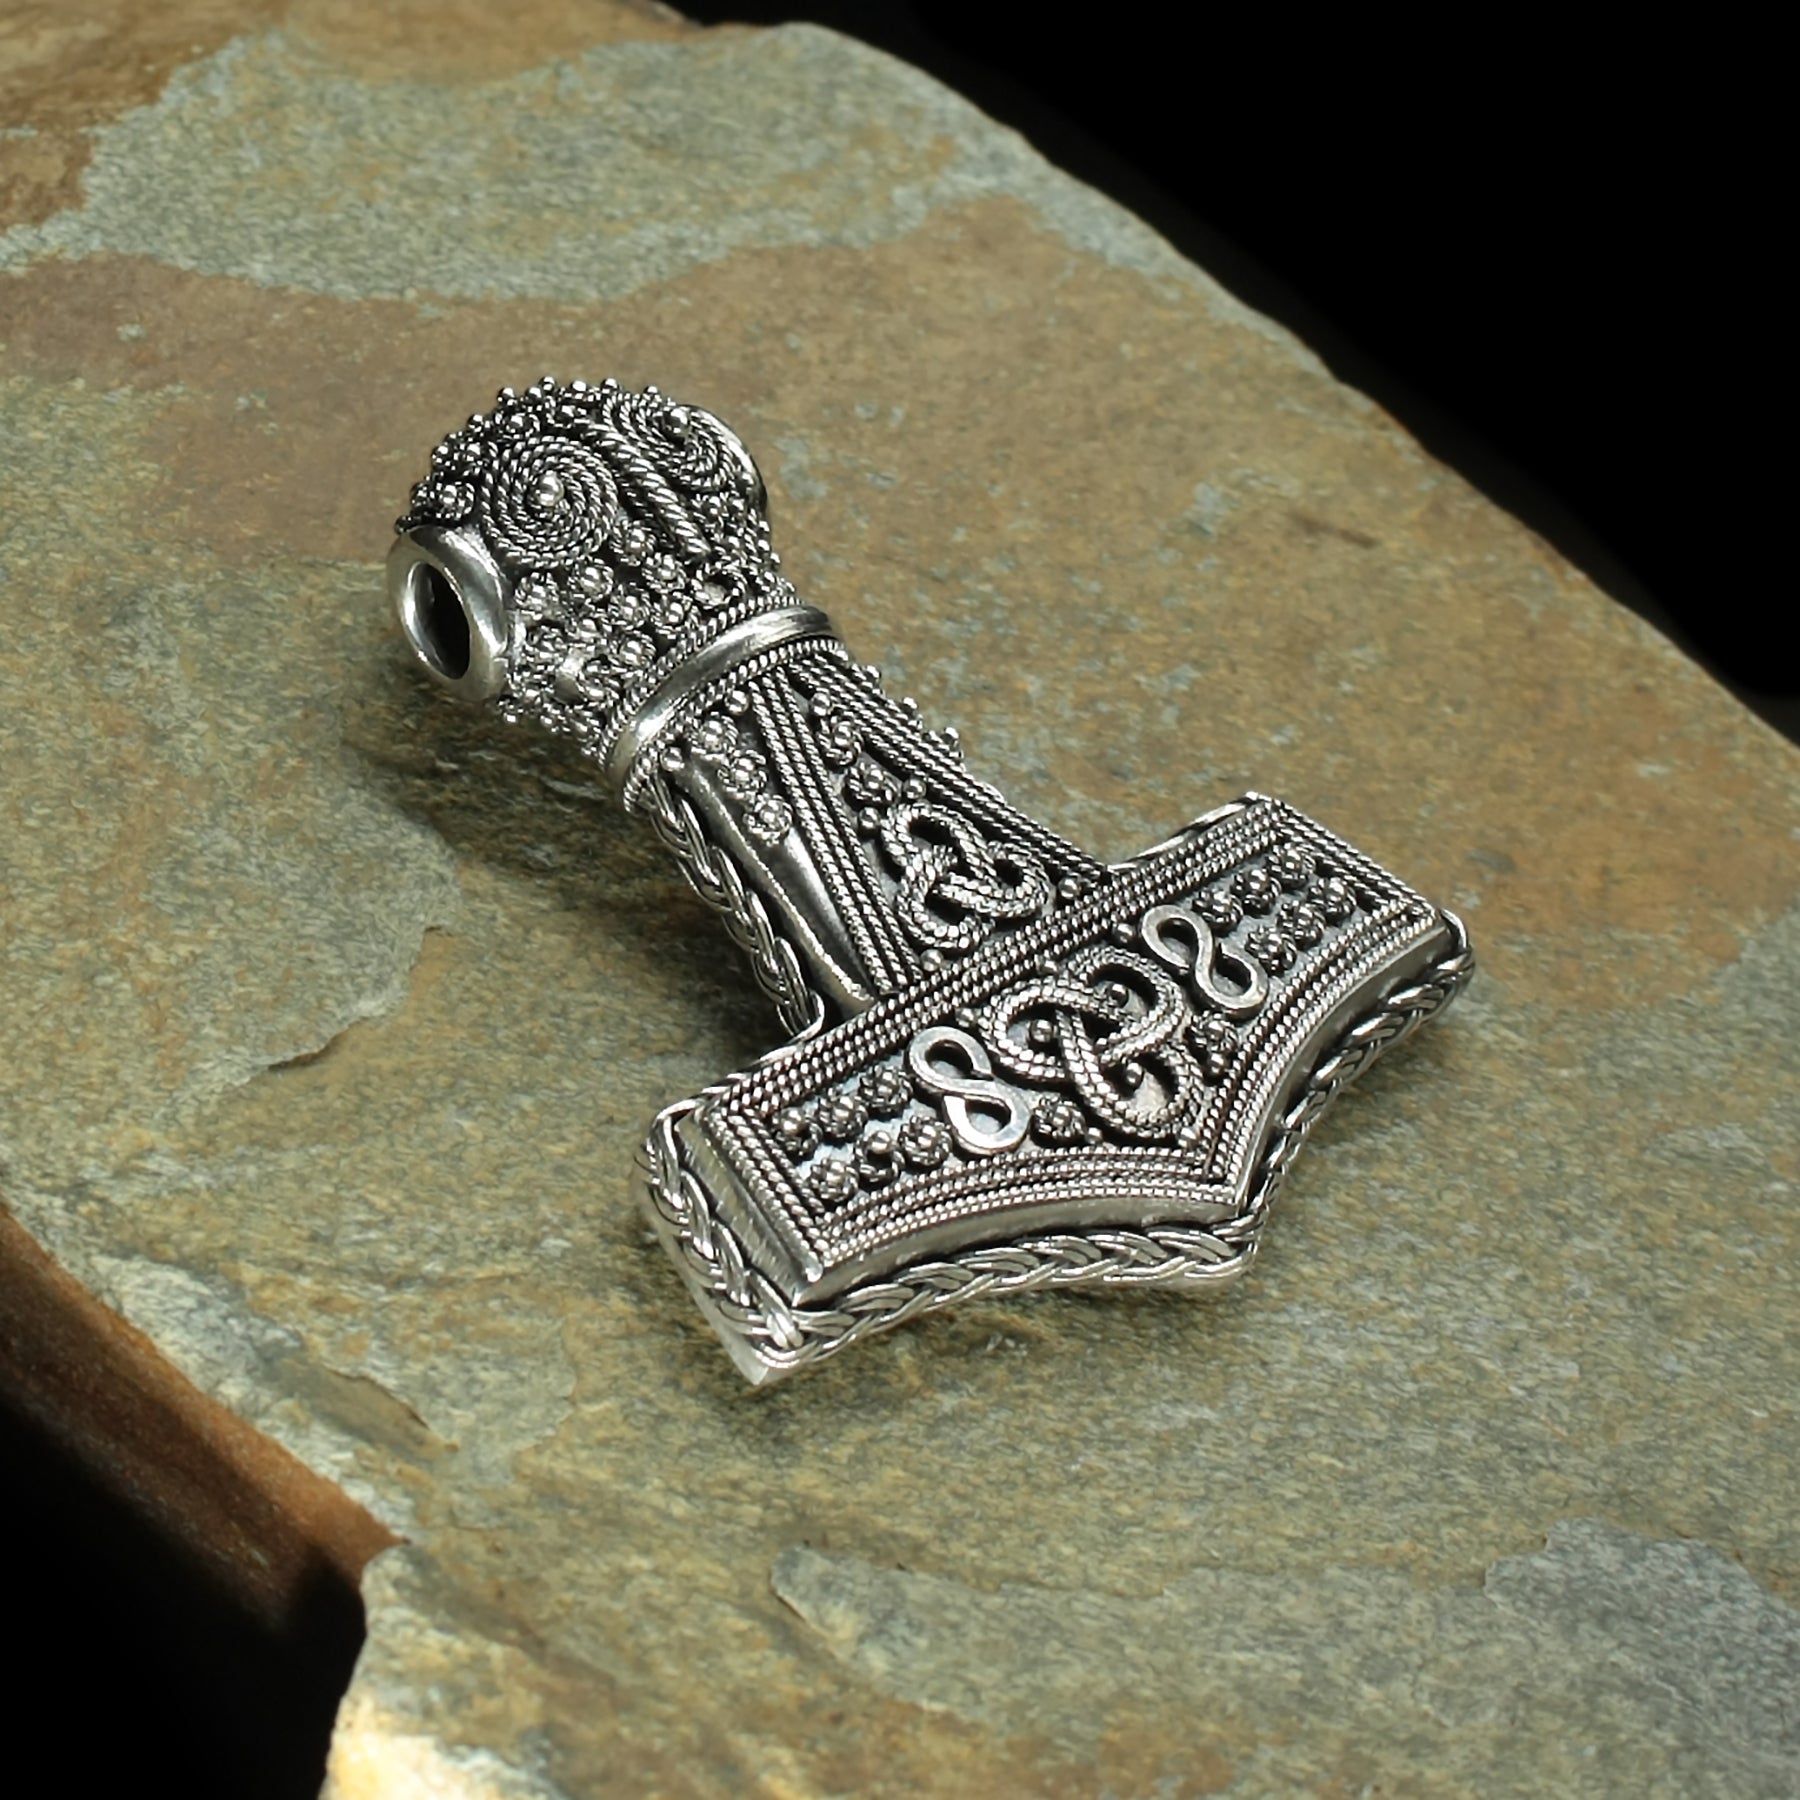 Large Silver Filigree Thors Hammer Pendant Replica from Öland on Rock